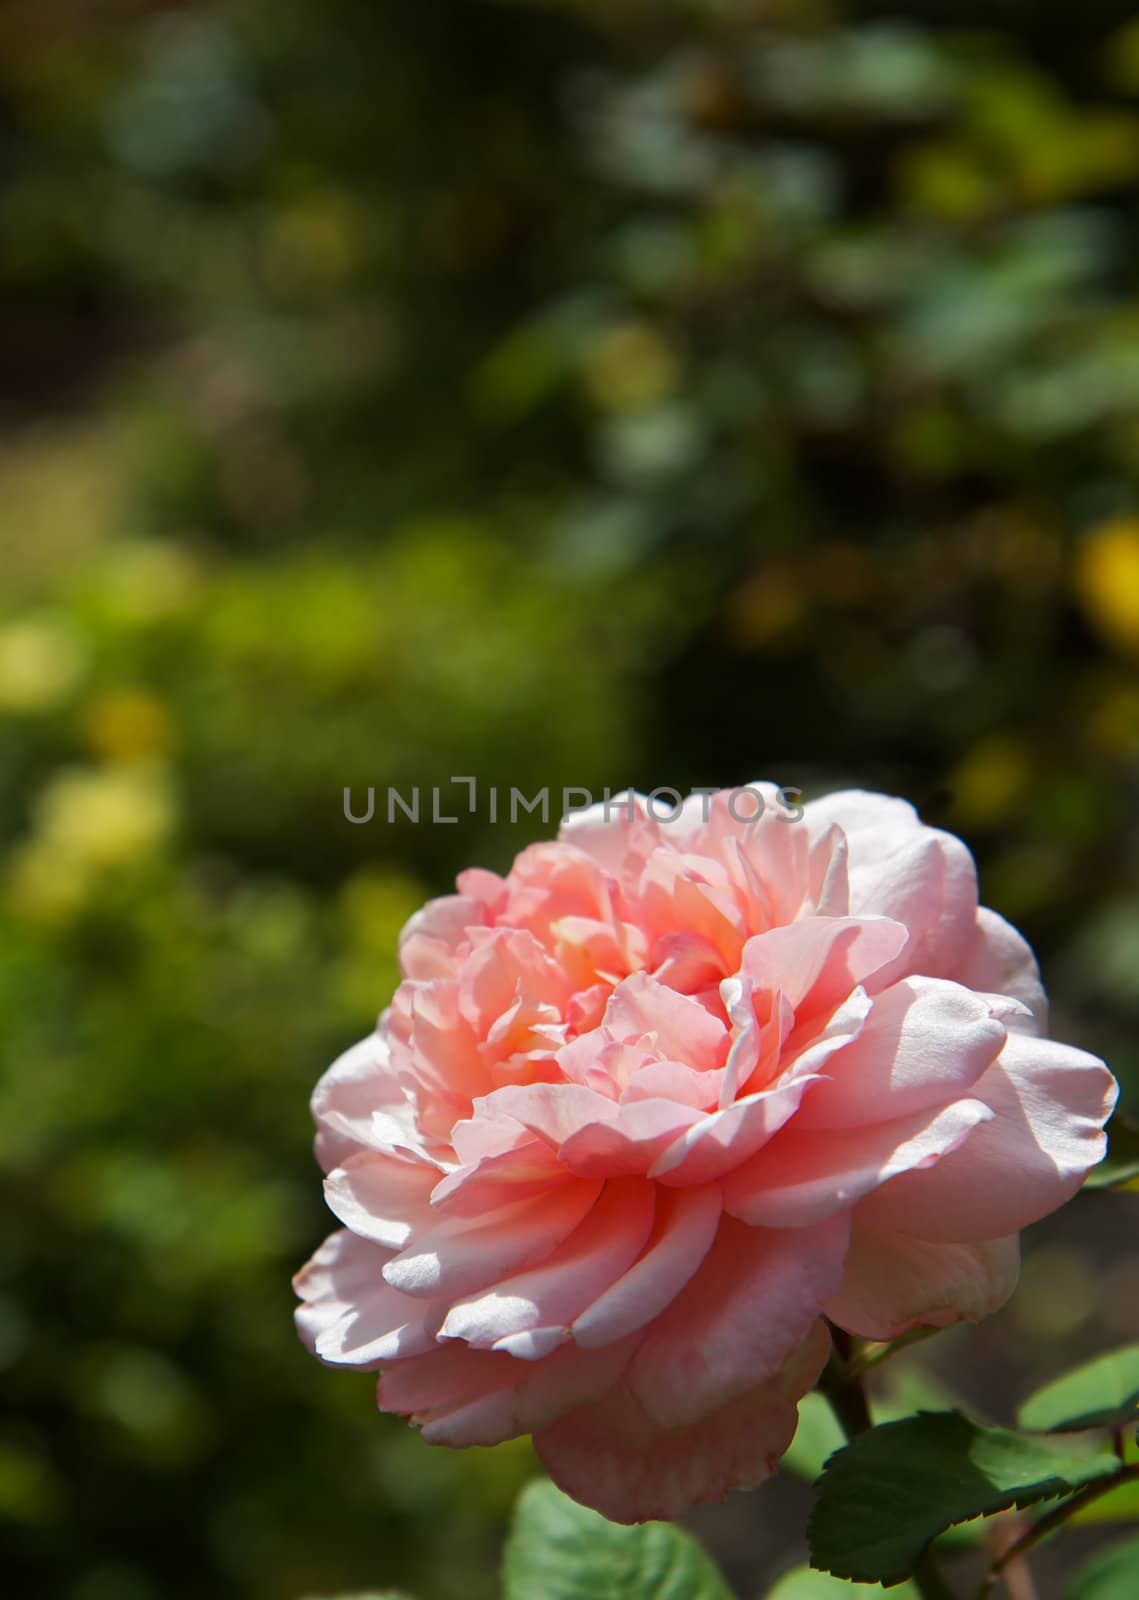 Large Pink Rose with soft focus green bushes in background